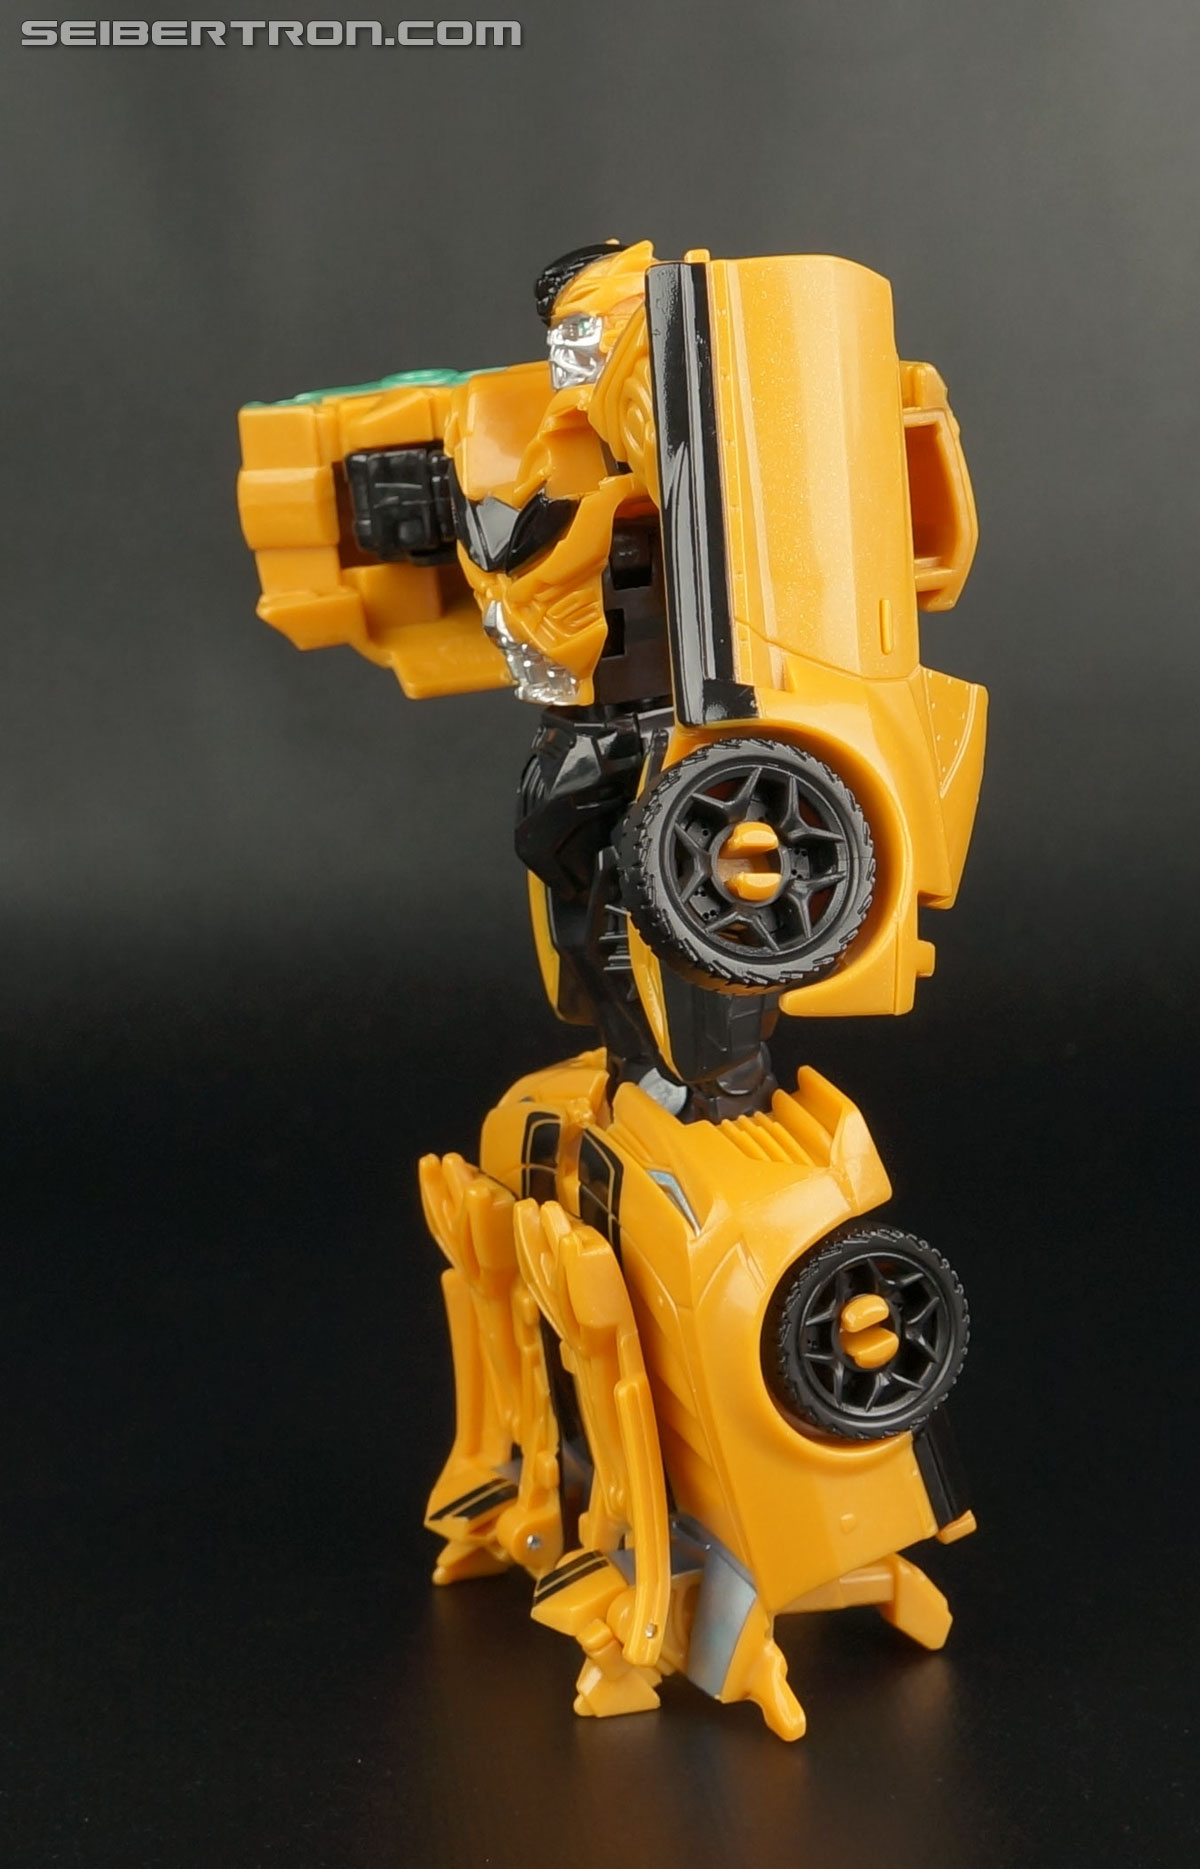 Transformers Age of Extinction: Robots In Disguise Power Punch Bumblebee (Image #51 of 70)